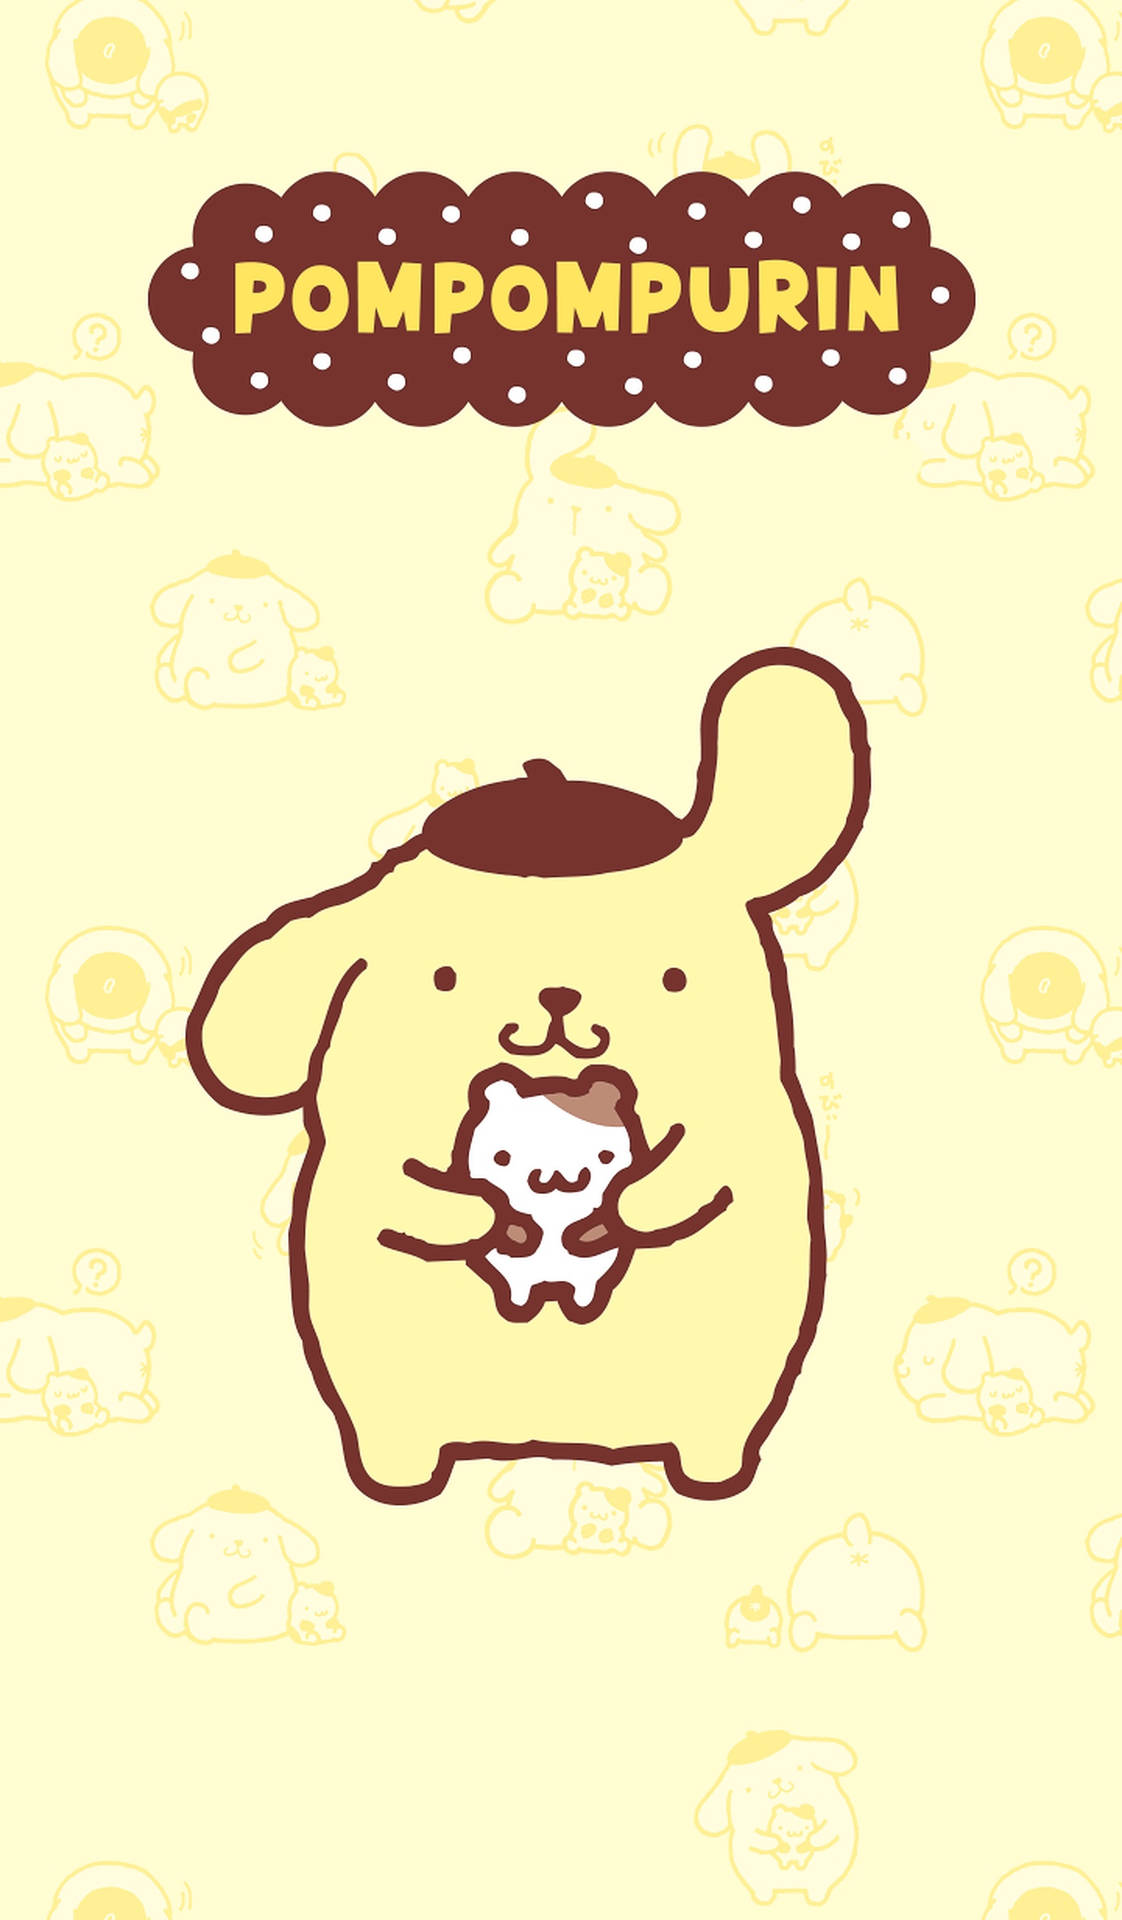 Pompompurin With A Hamster